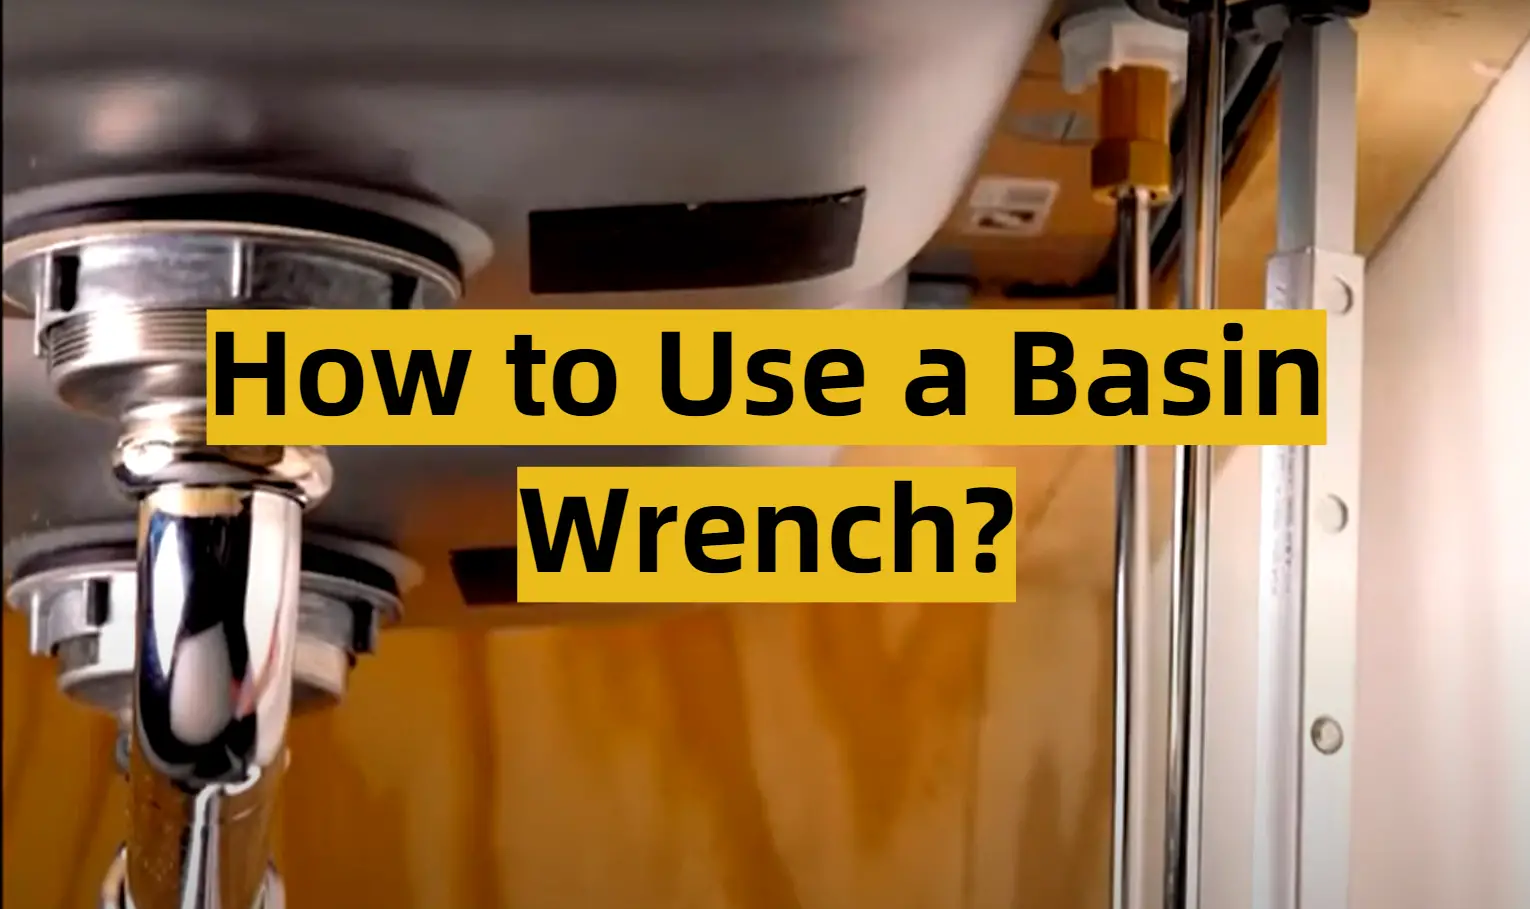 How to Use a Basin Wrench?